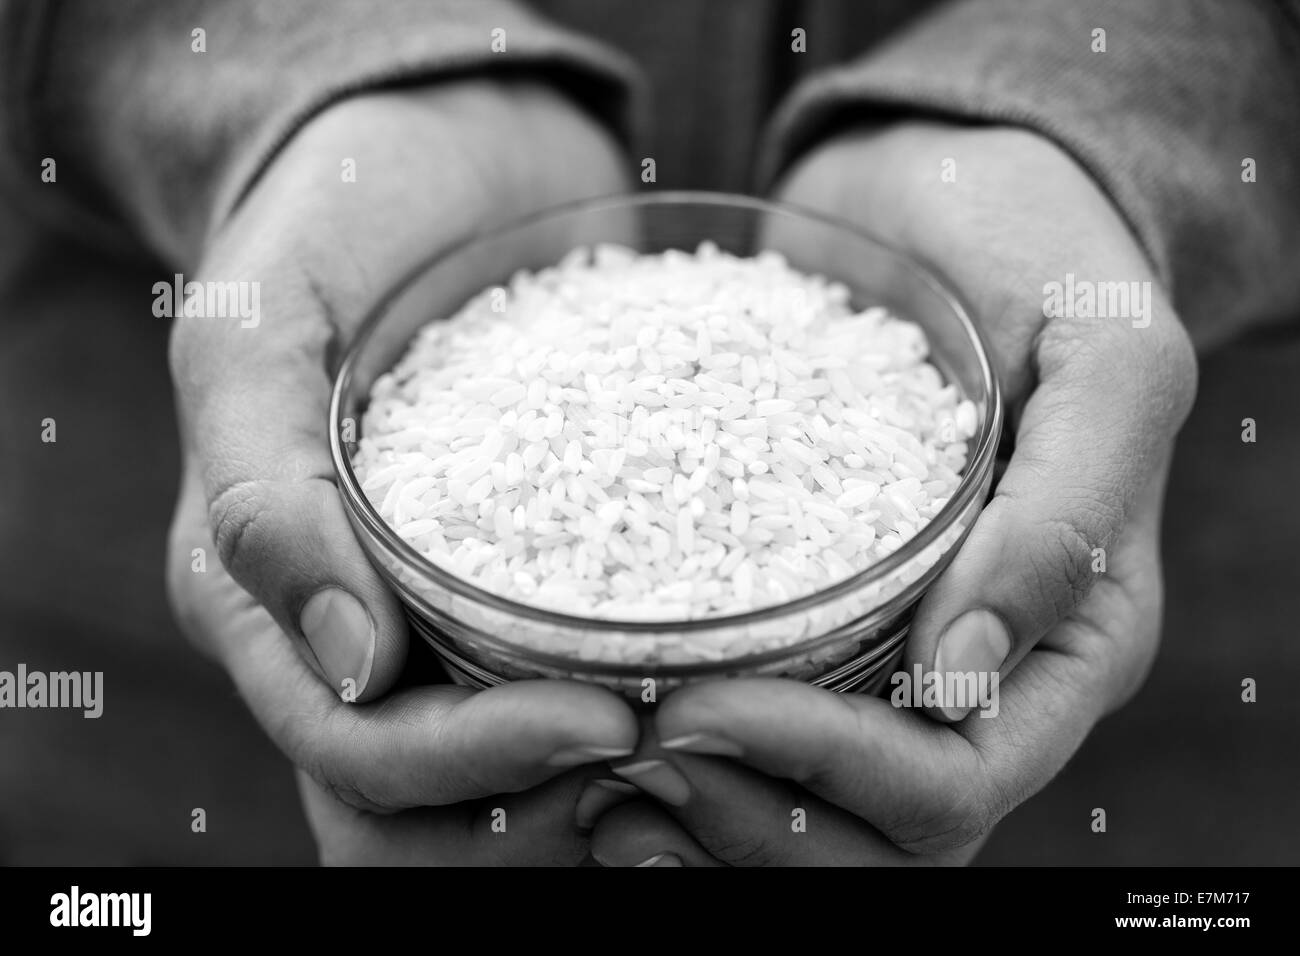 White rice in a bowl in woman's palms. Black and White image. Stock Photo